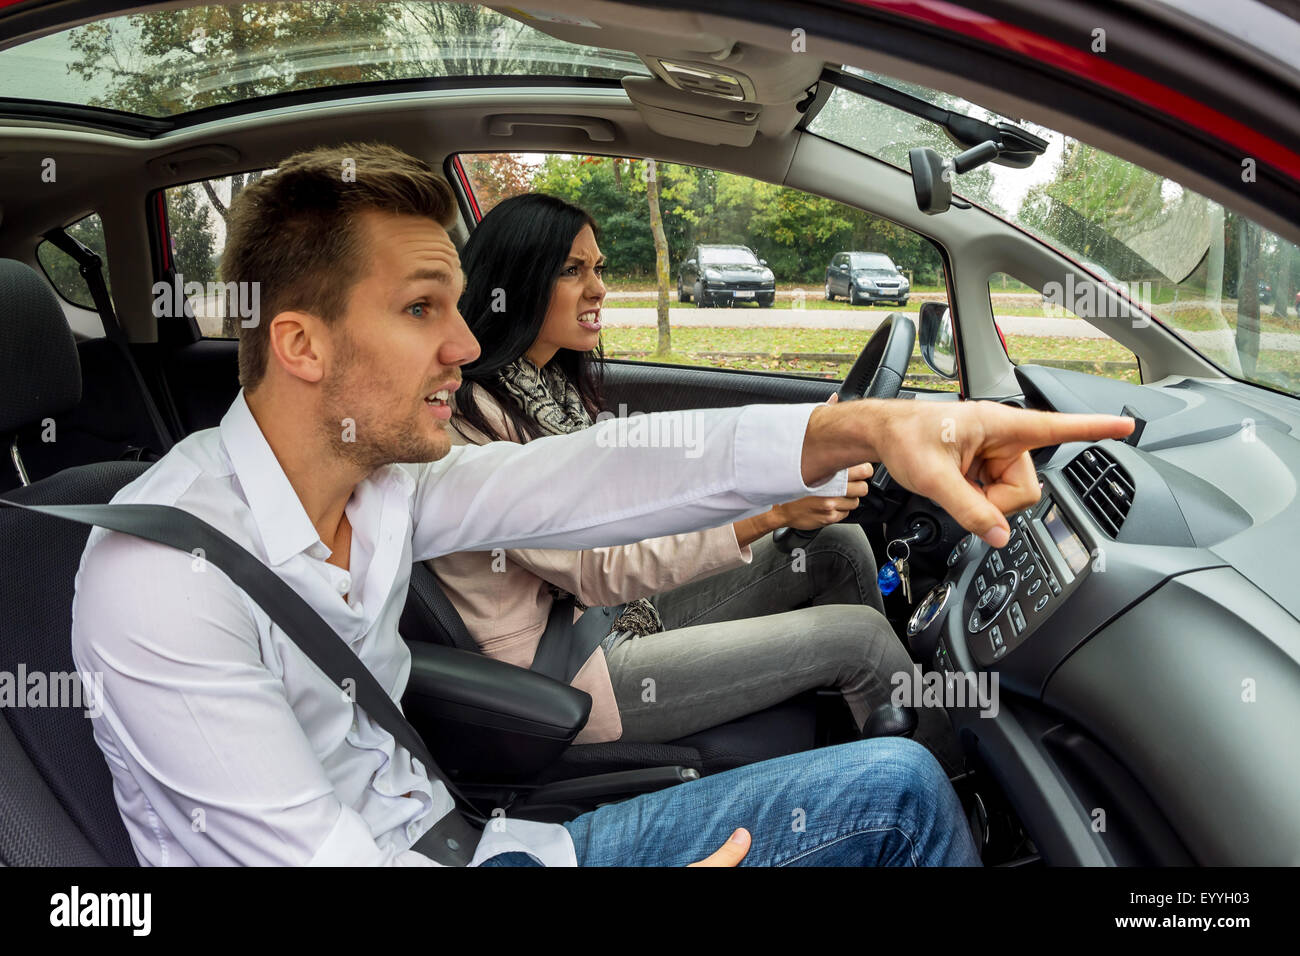 young woman driving car with gesticulating man as co-driver, Austria Stock Photo